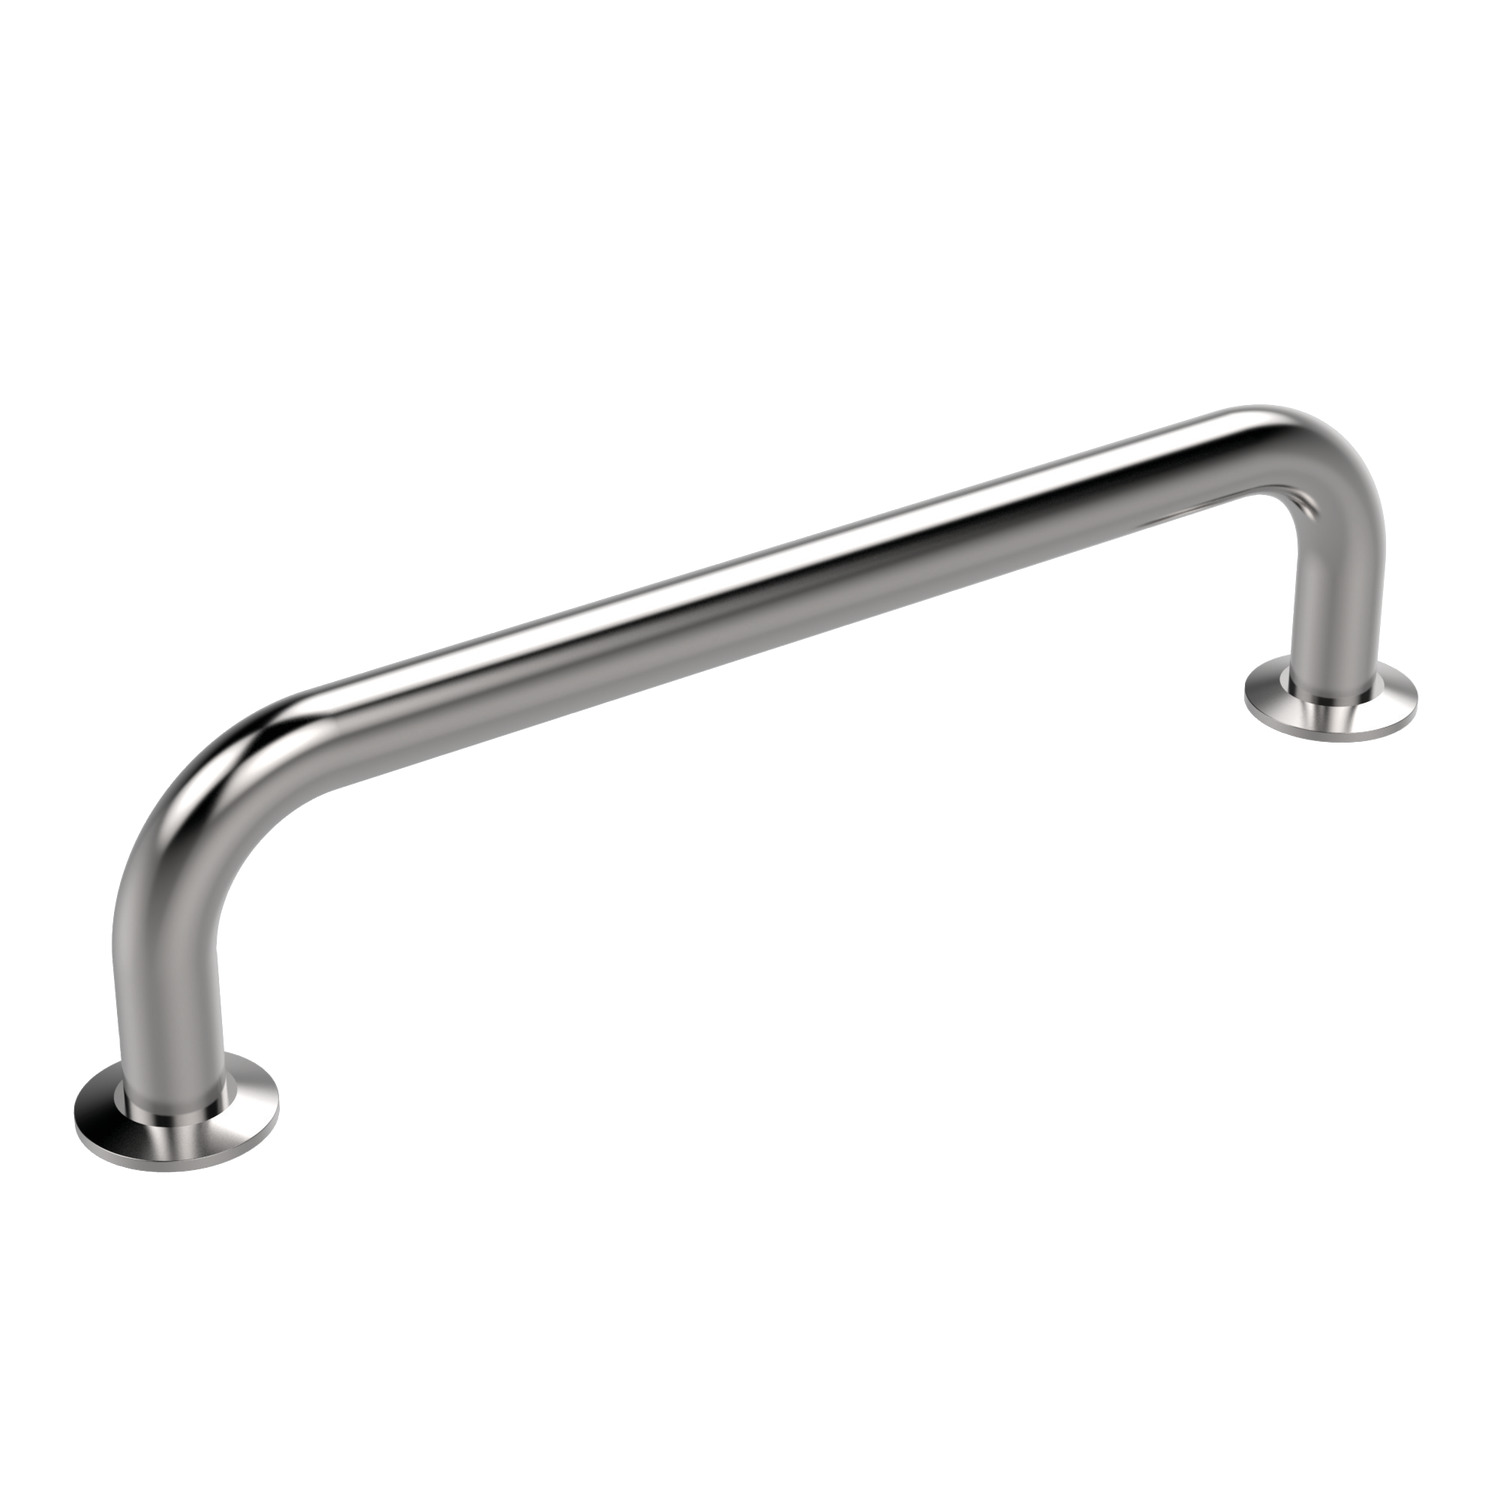 Pull Handles Steel pull handles straight, cranked, angular or offset with high finish. Also pull handles with plastic cover